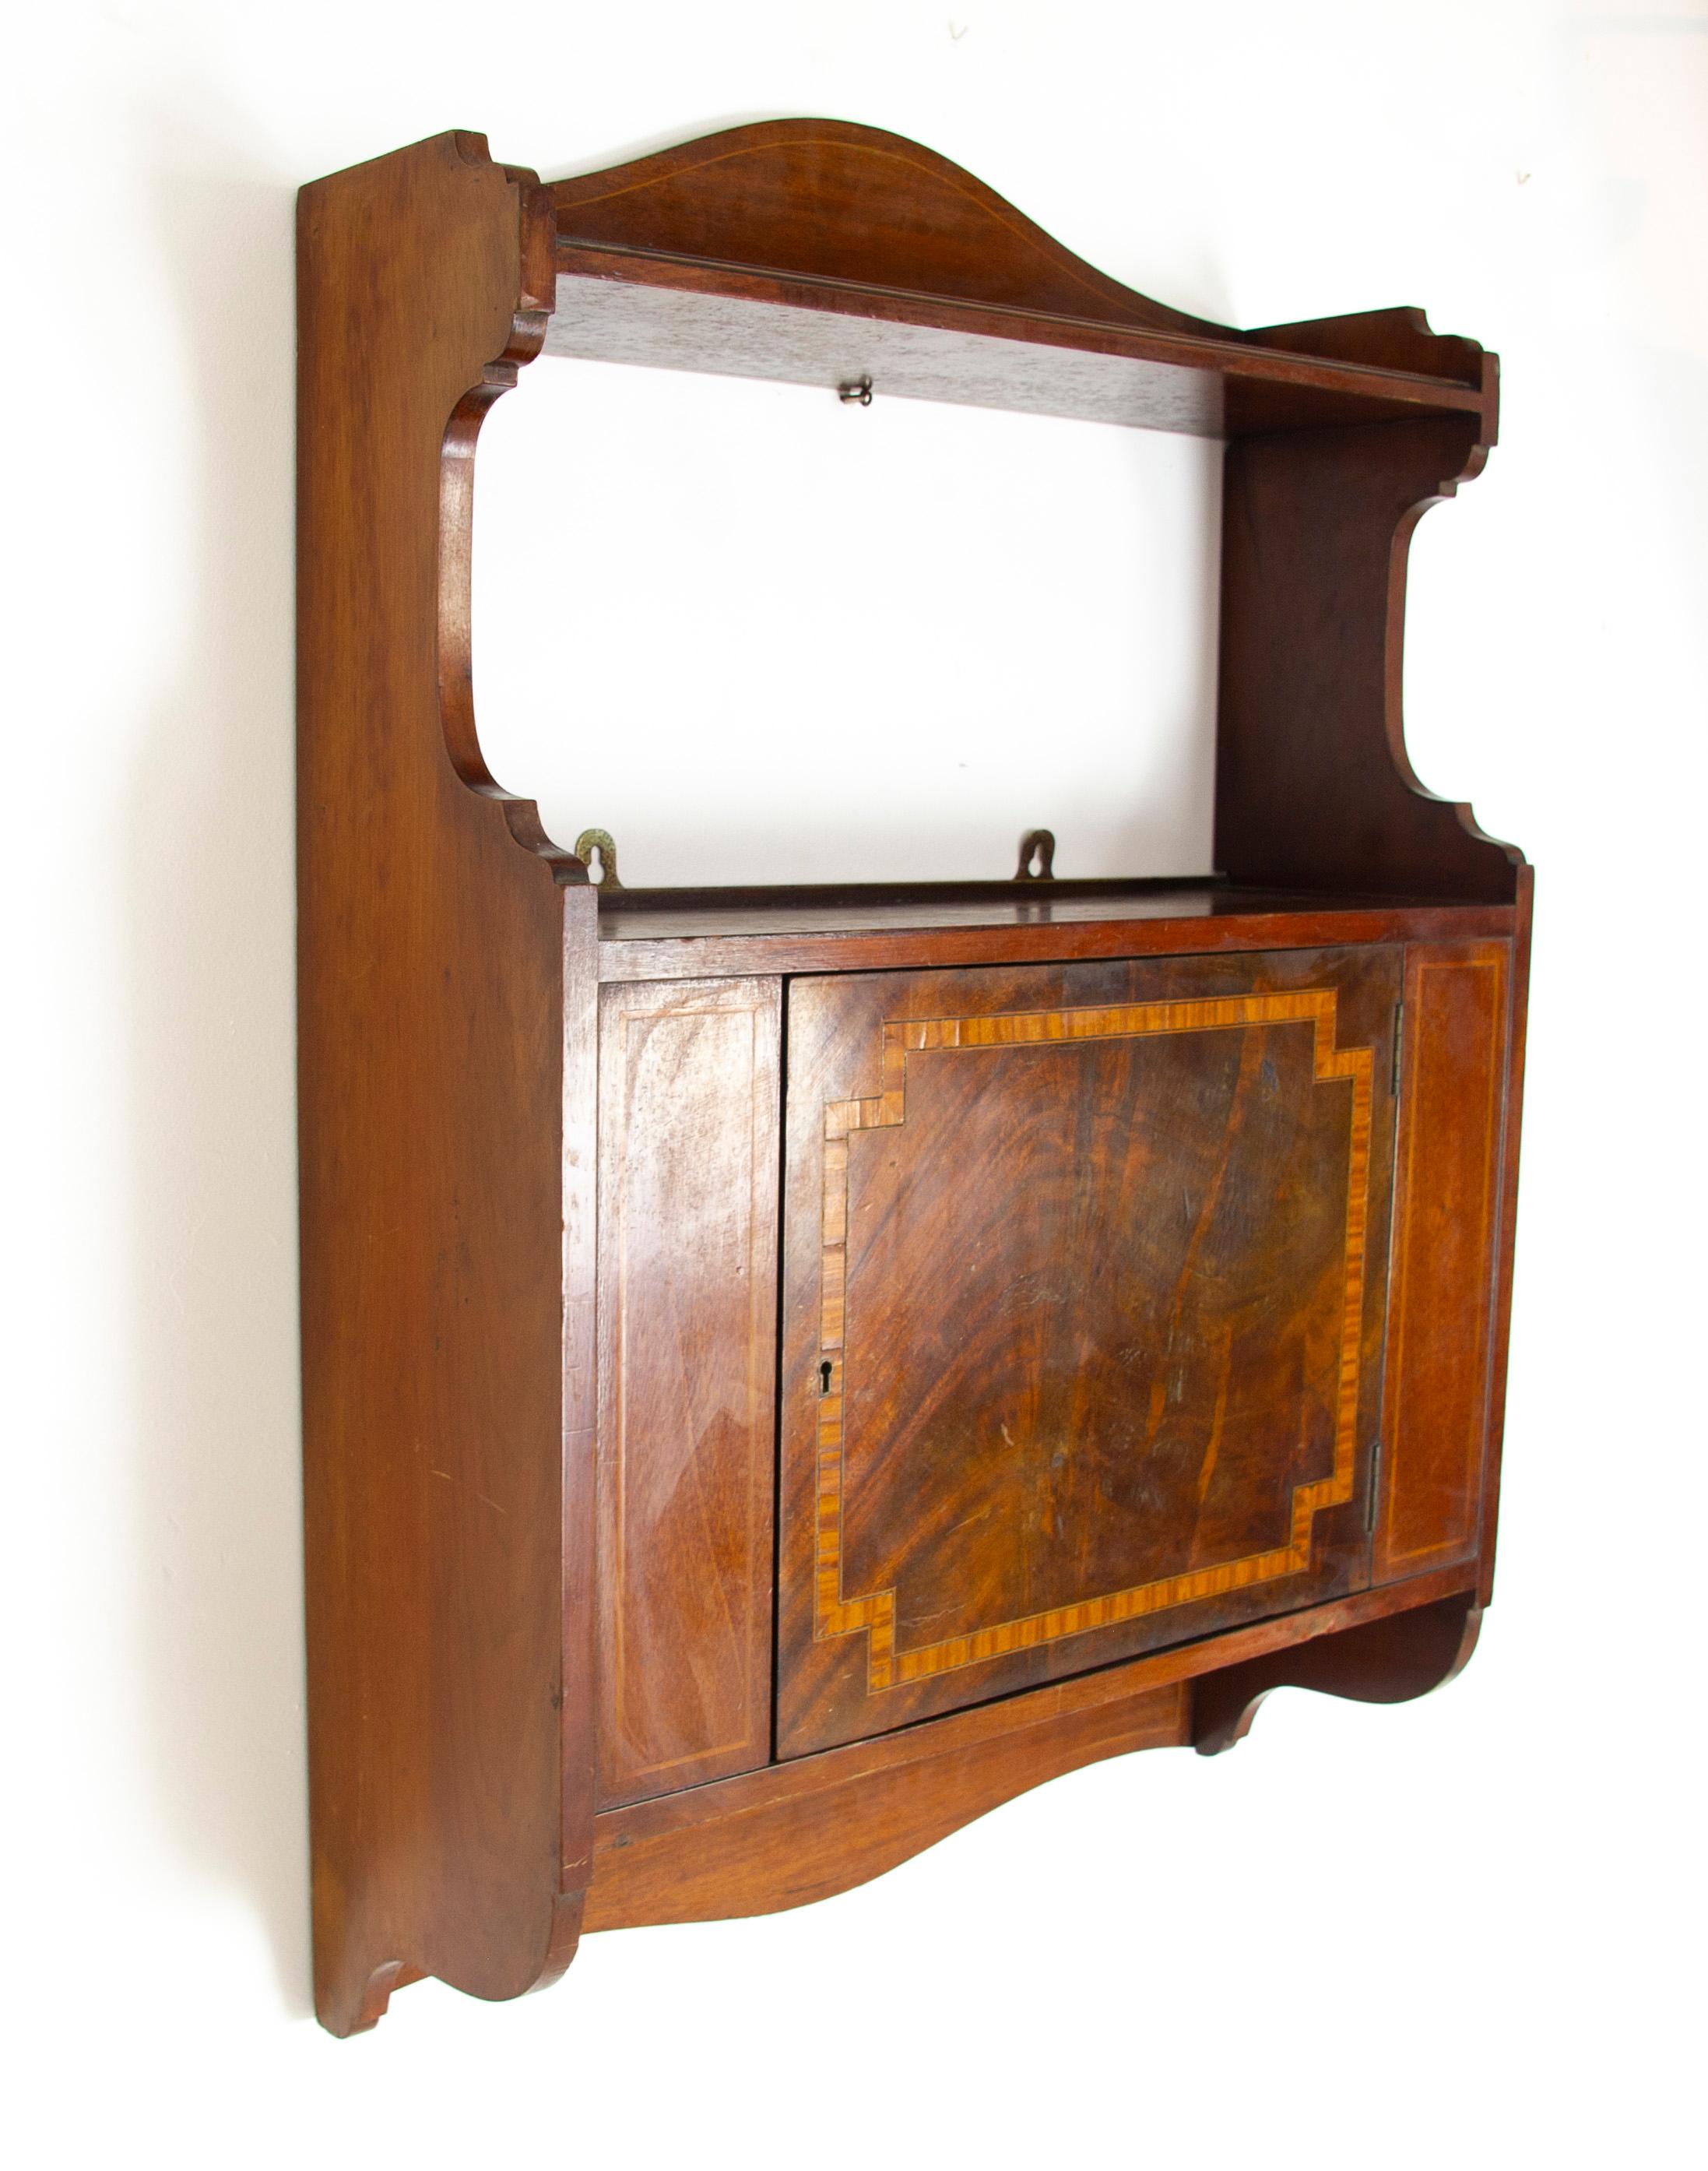 Hand-Crafted Antique Wall Cabinet, Scottish Walnut Hanging Wall Cabinet, Scotland 1910, B1369